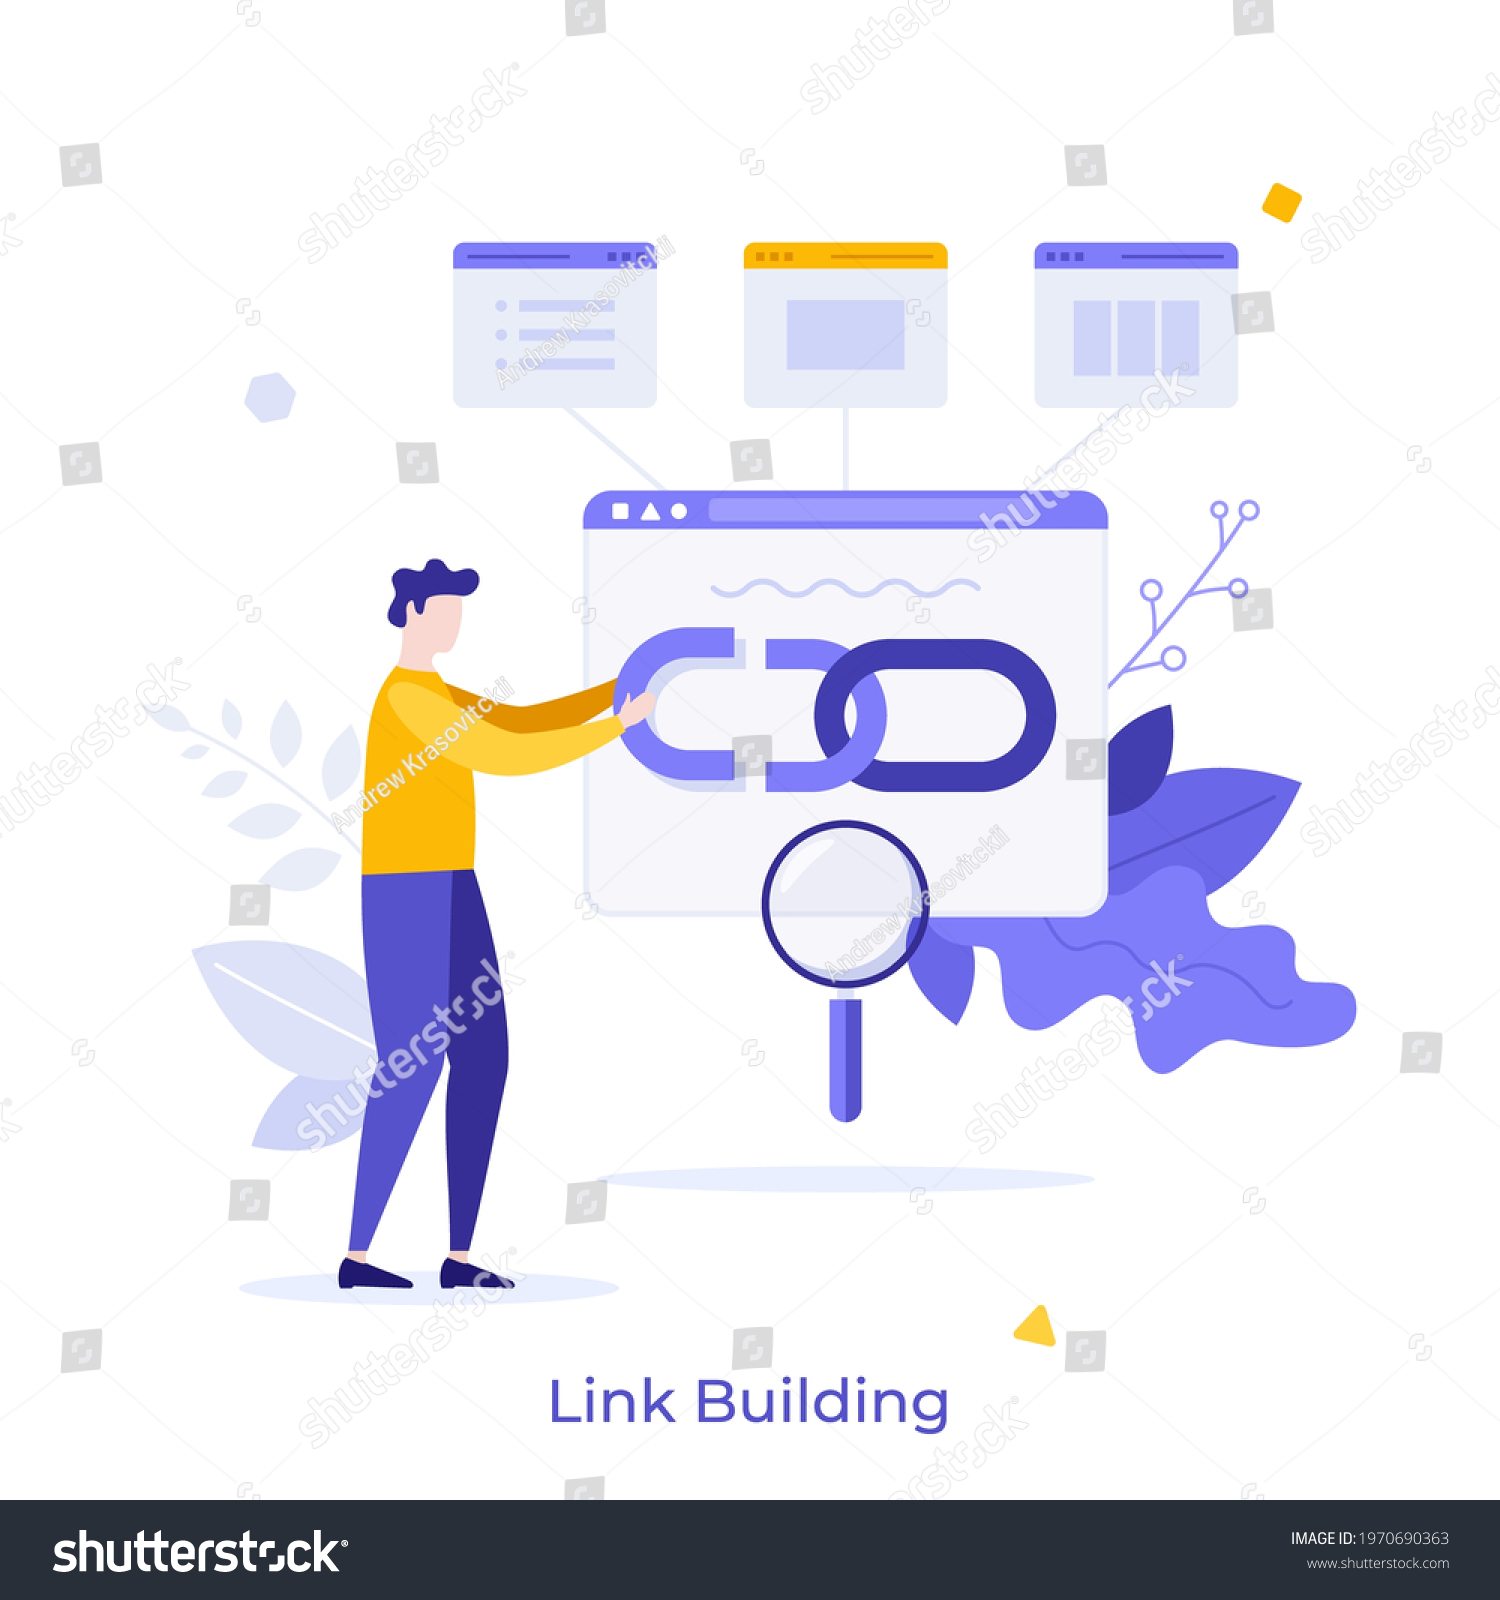 SVG of Man holding chain on bowser window. Concept of link building for search engine optimization, acquiring hyperlinks from websites to get traffic. Modern flat colorful vector illustration for banner. svg